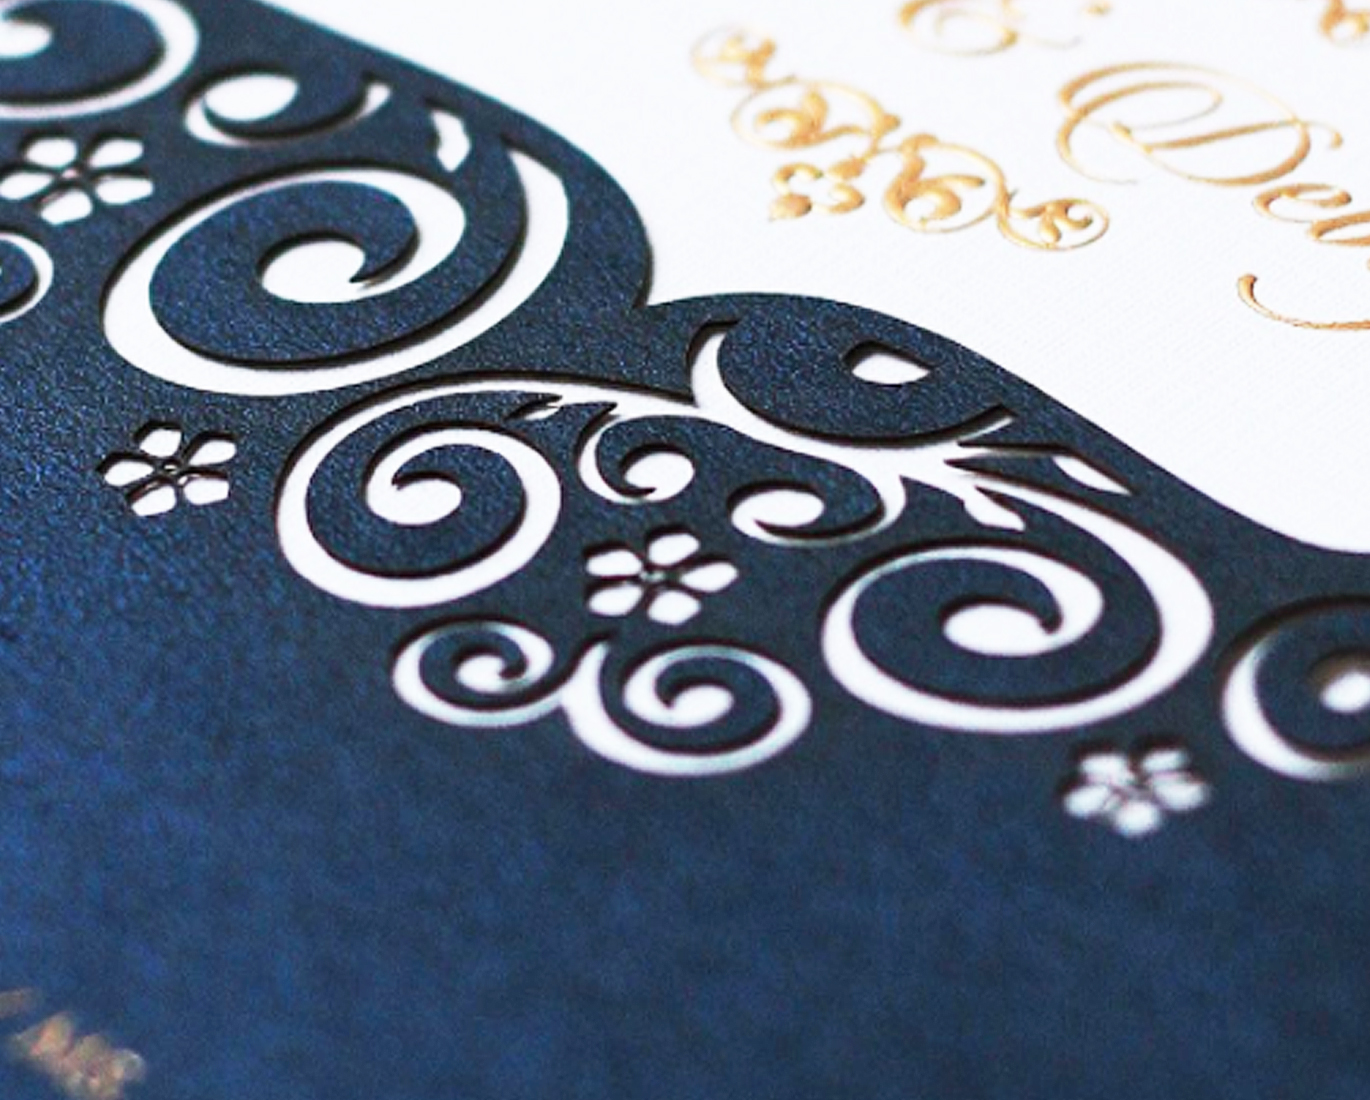 special finishing laser cut papermint custom wedding invitation and stationery design